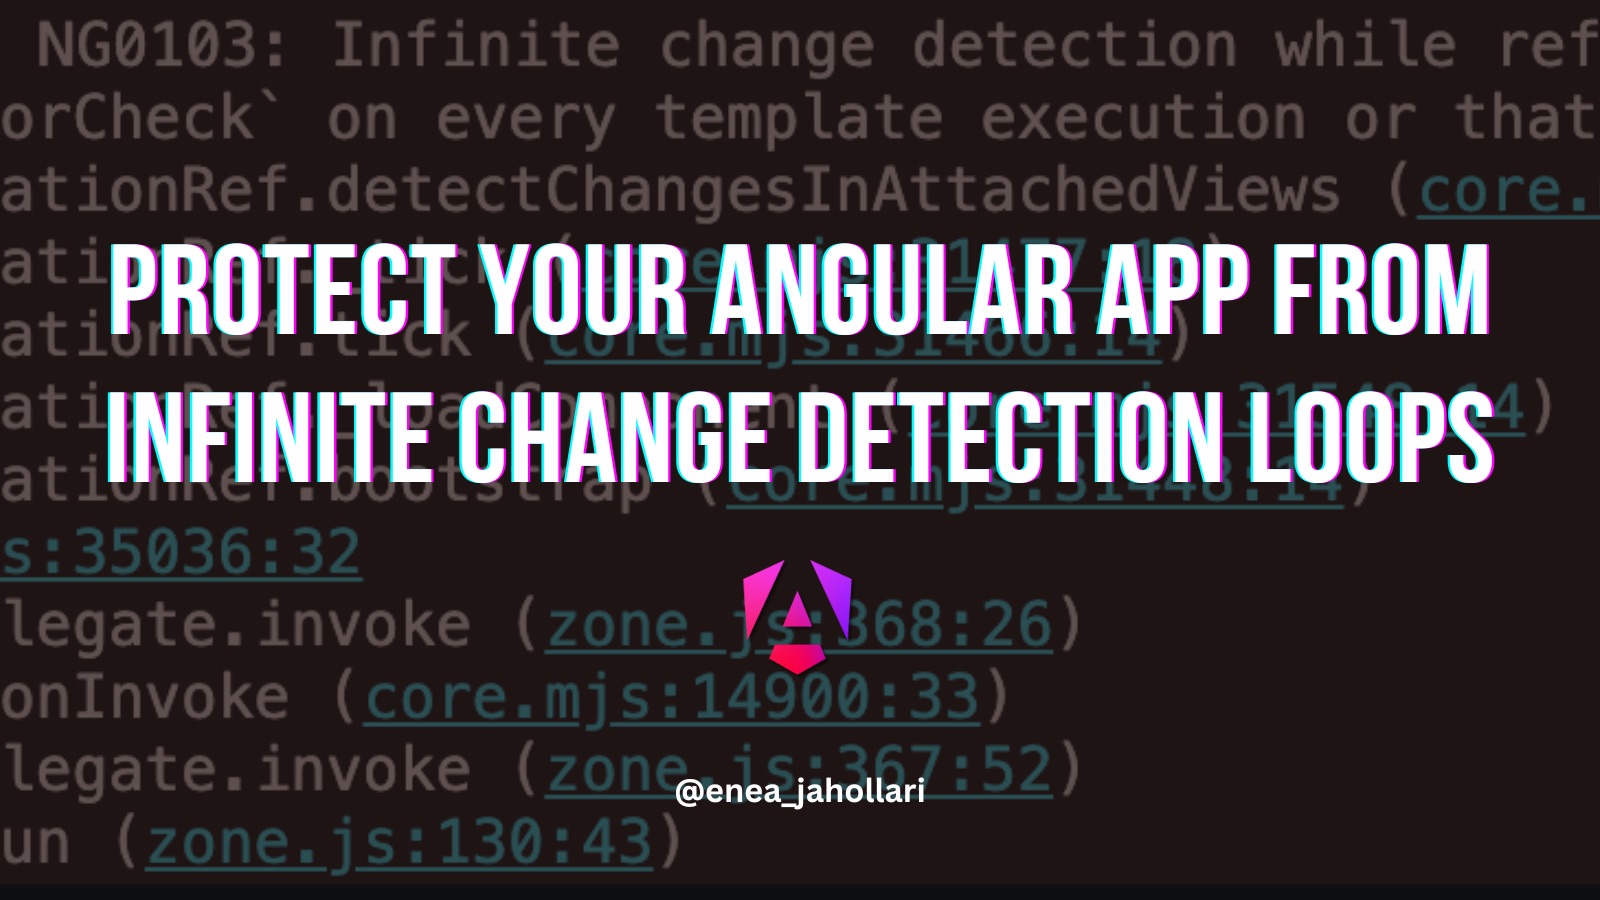 How to not get caught in an infinite change detection loop in Angular.